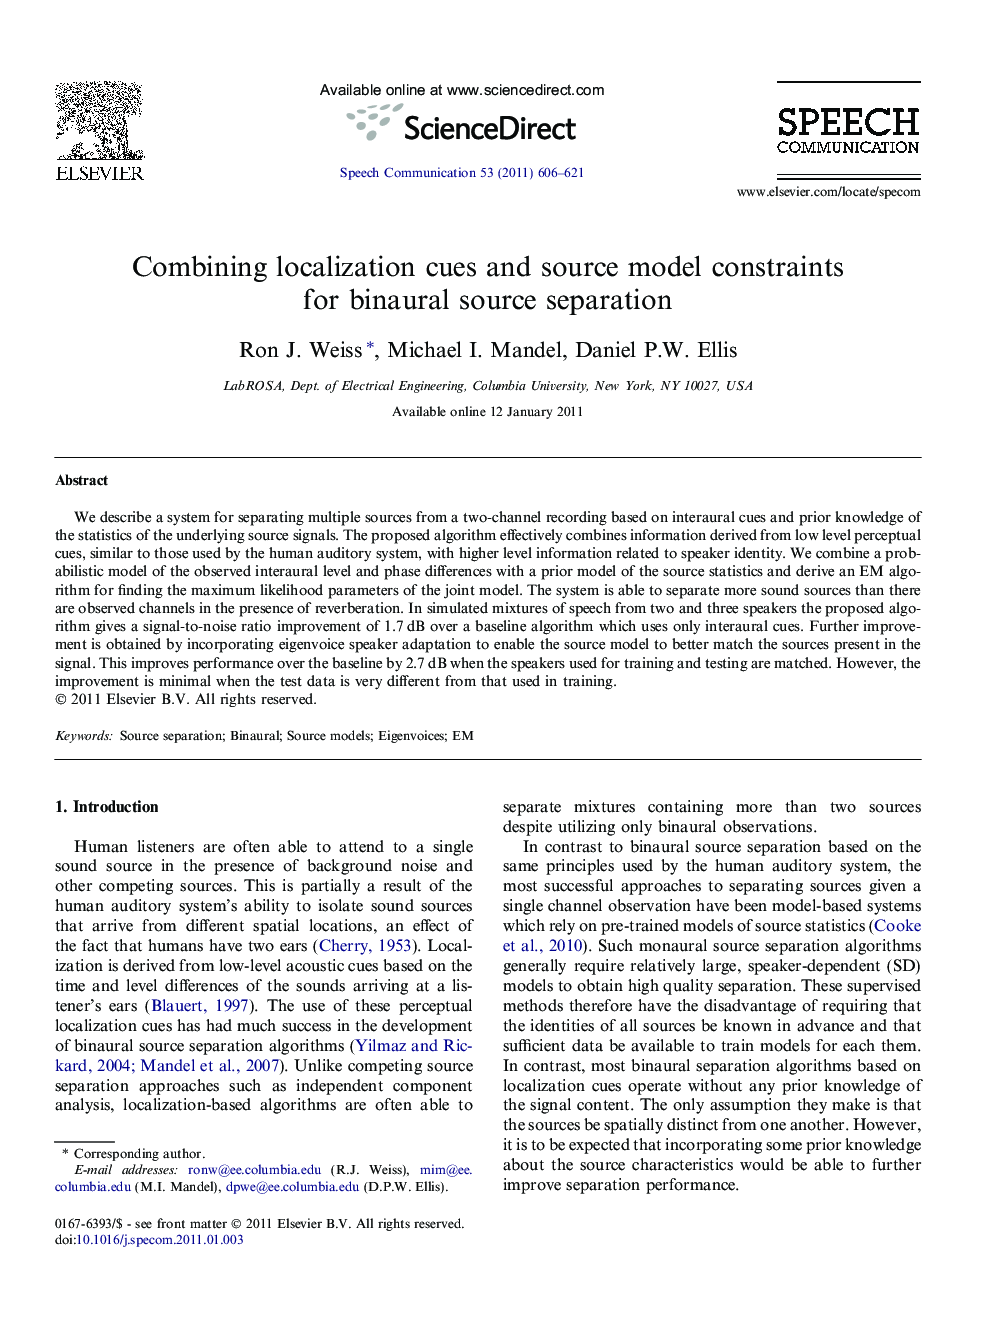 Combining localization cues and source model constraints for binaural source separation